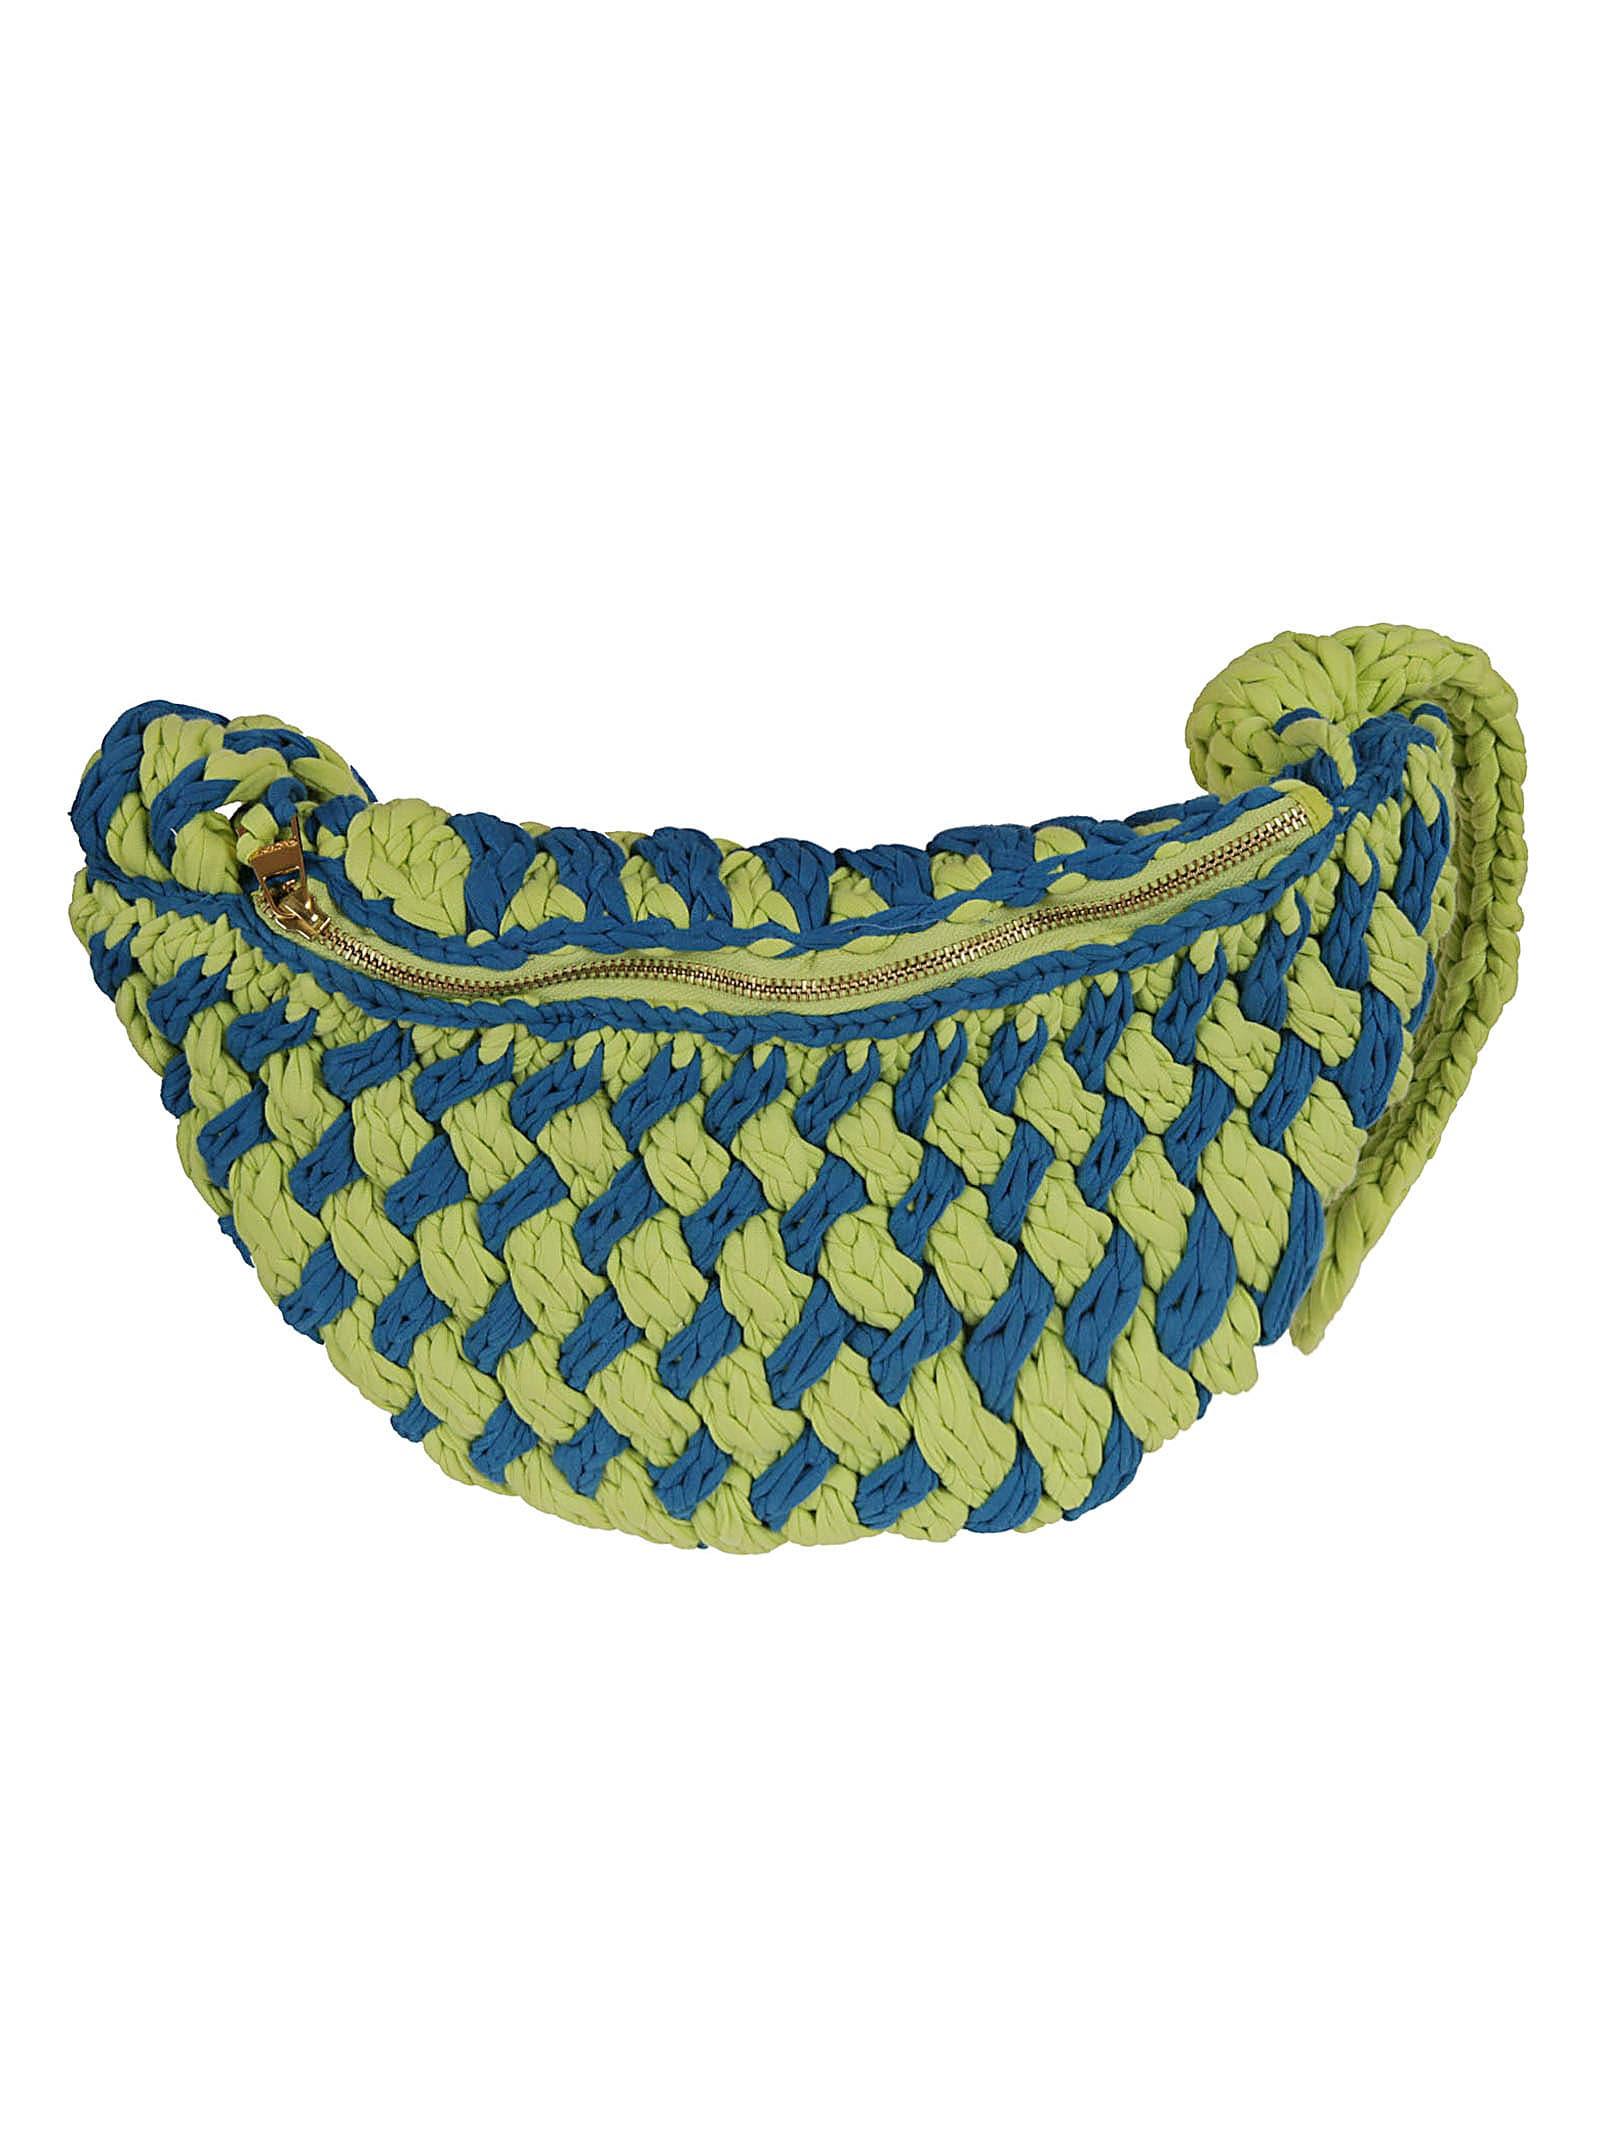 JW Anderson Knitted Bum Bag in Blue | Lyst